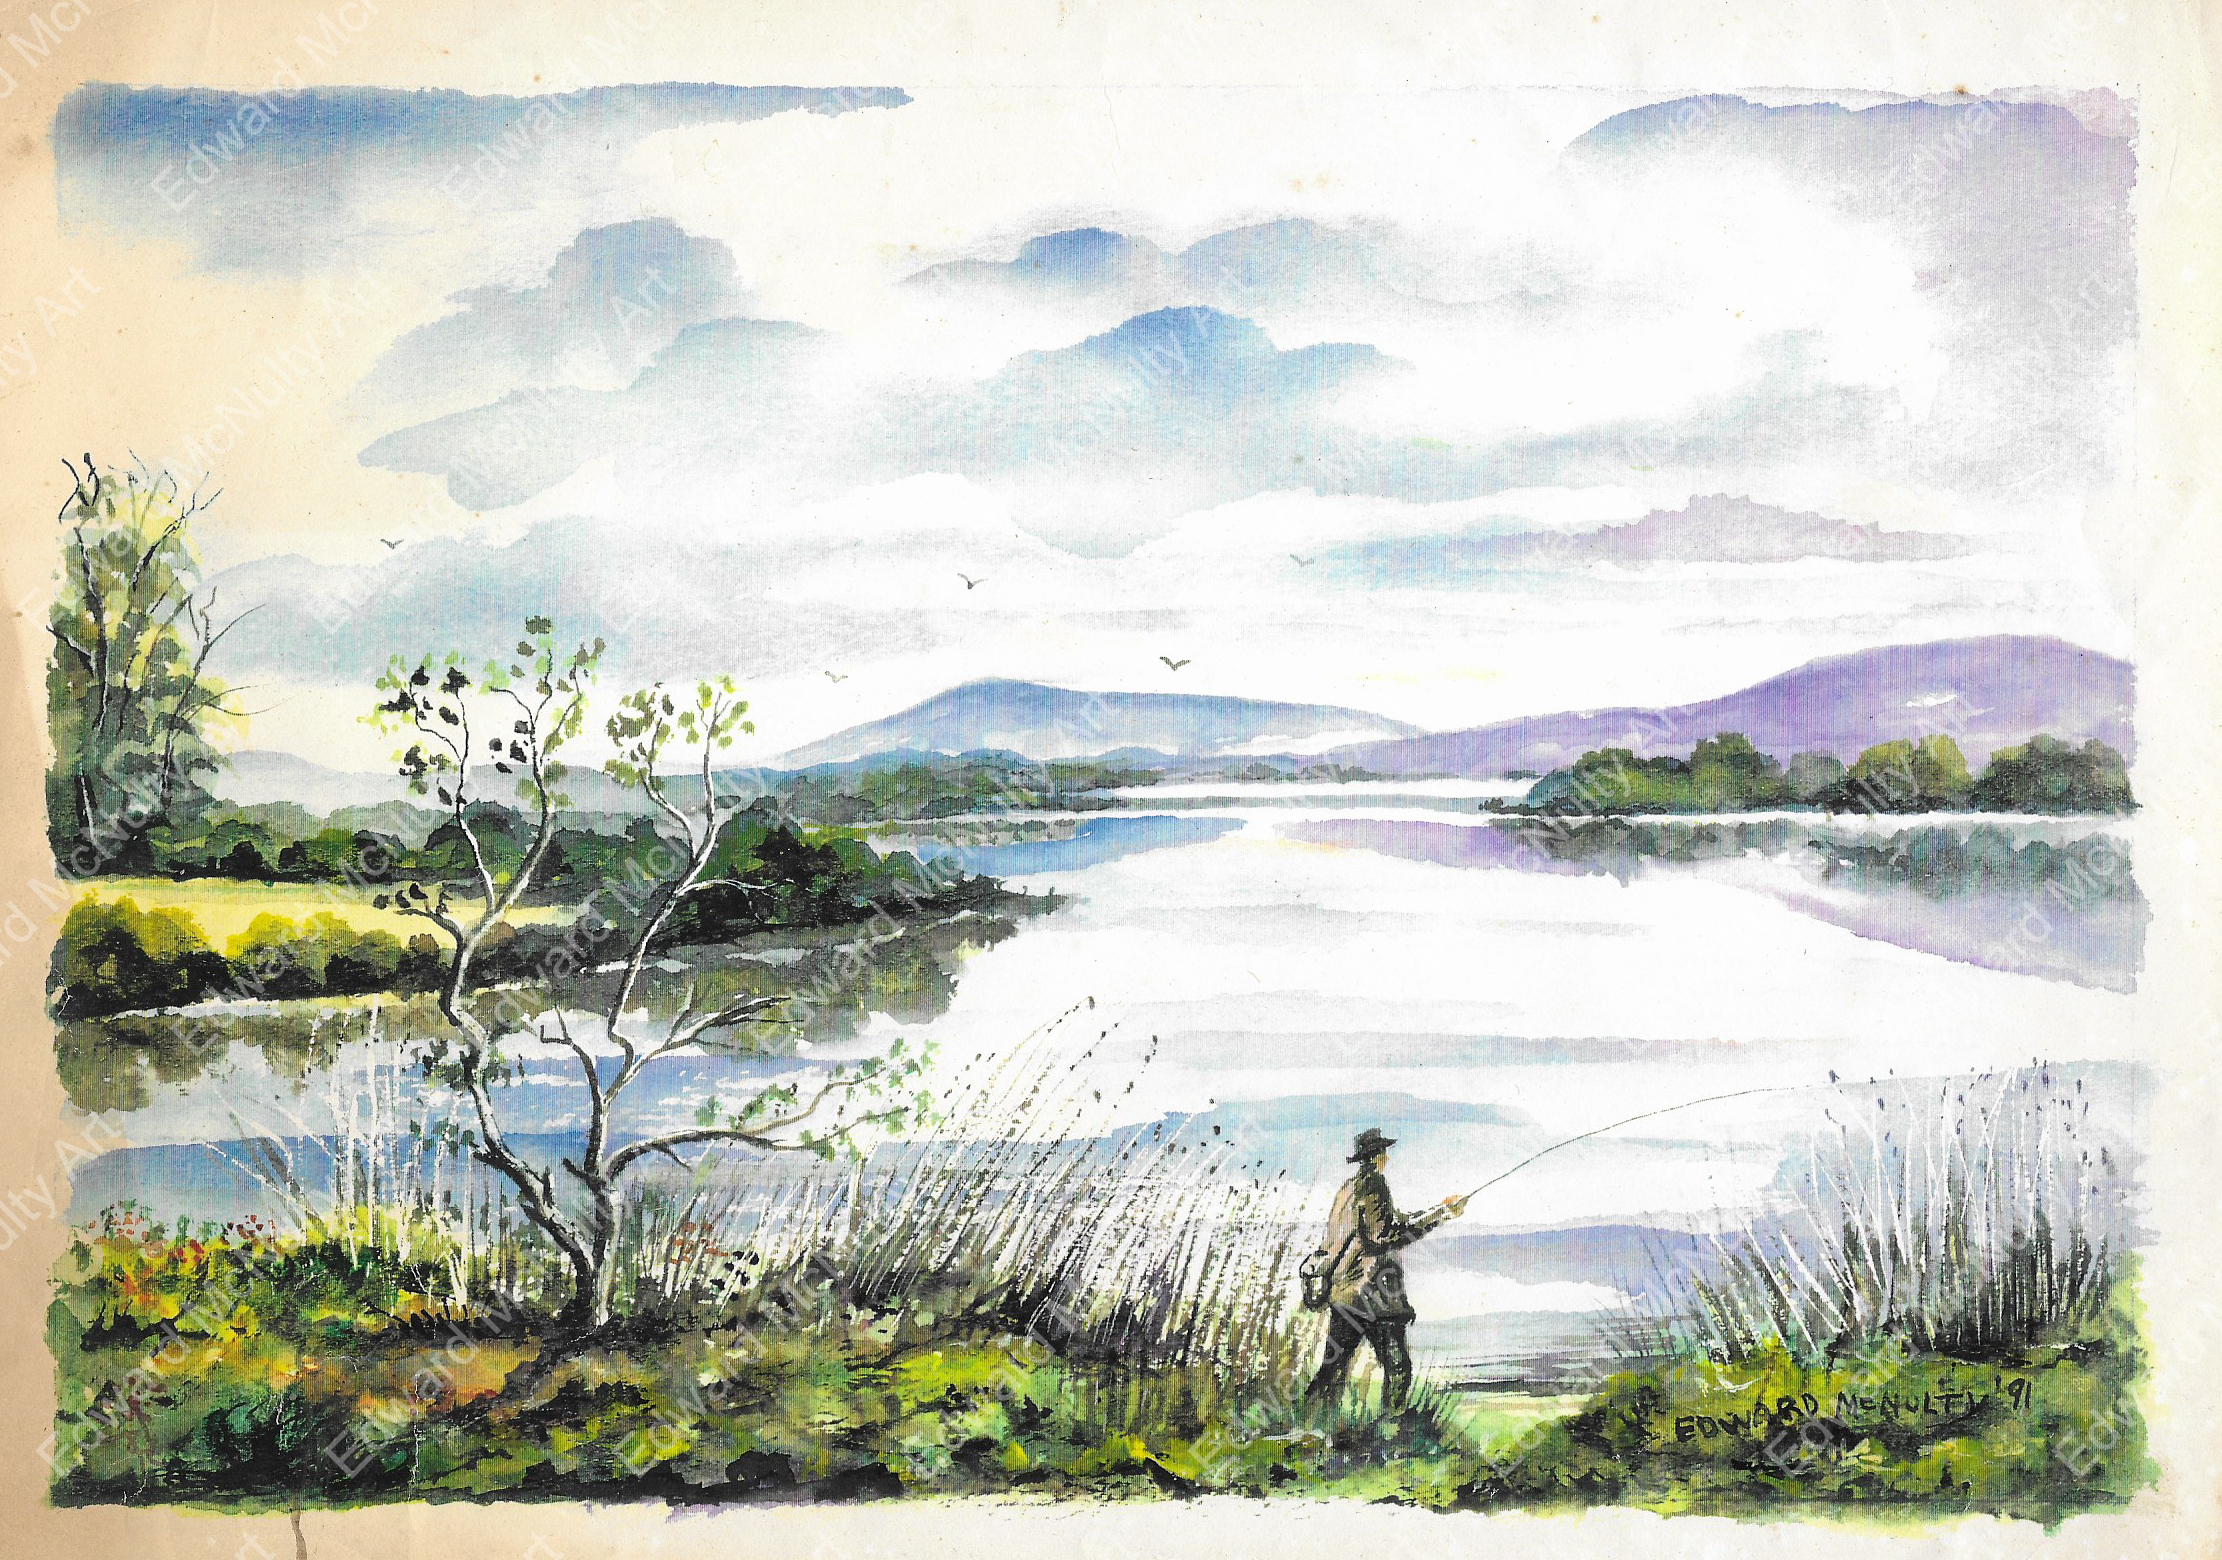 The Fisherman on Lough Erne, Co. Fermanagh